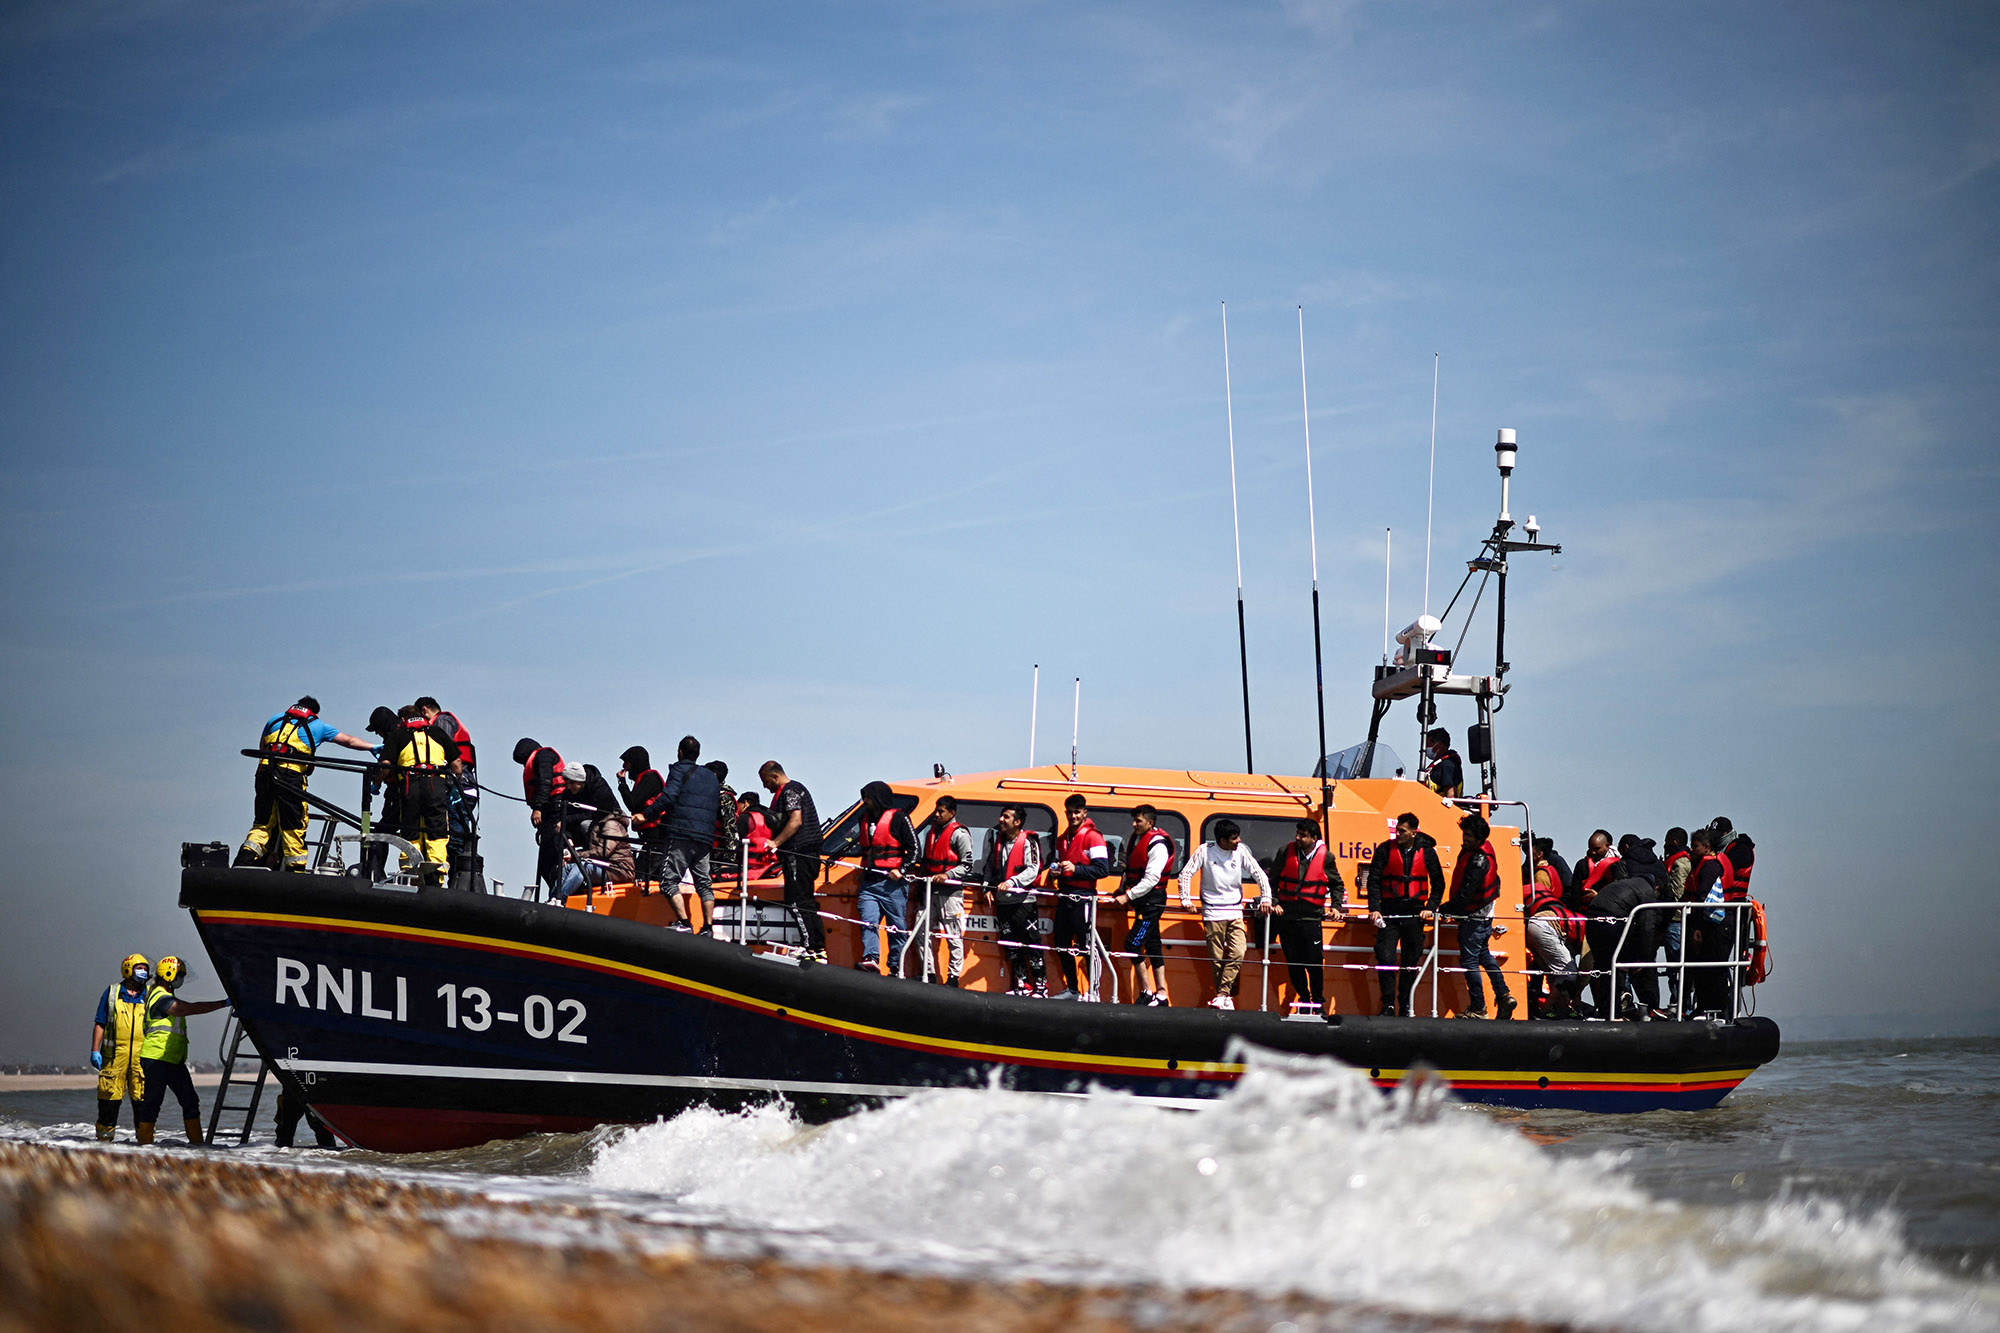 More Than 12,000 Migrants Have Crossed Channel to Reach UK So Far This Year  - Bloomberg